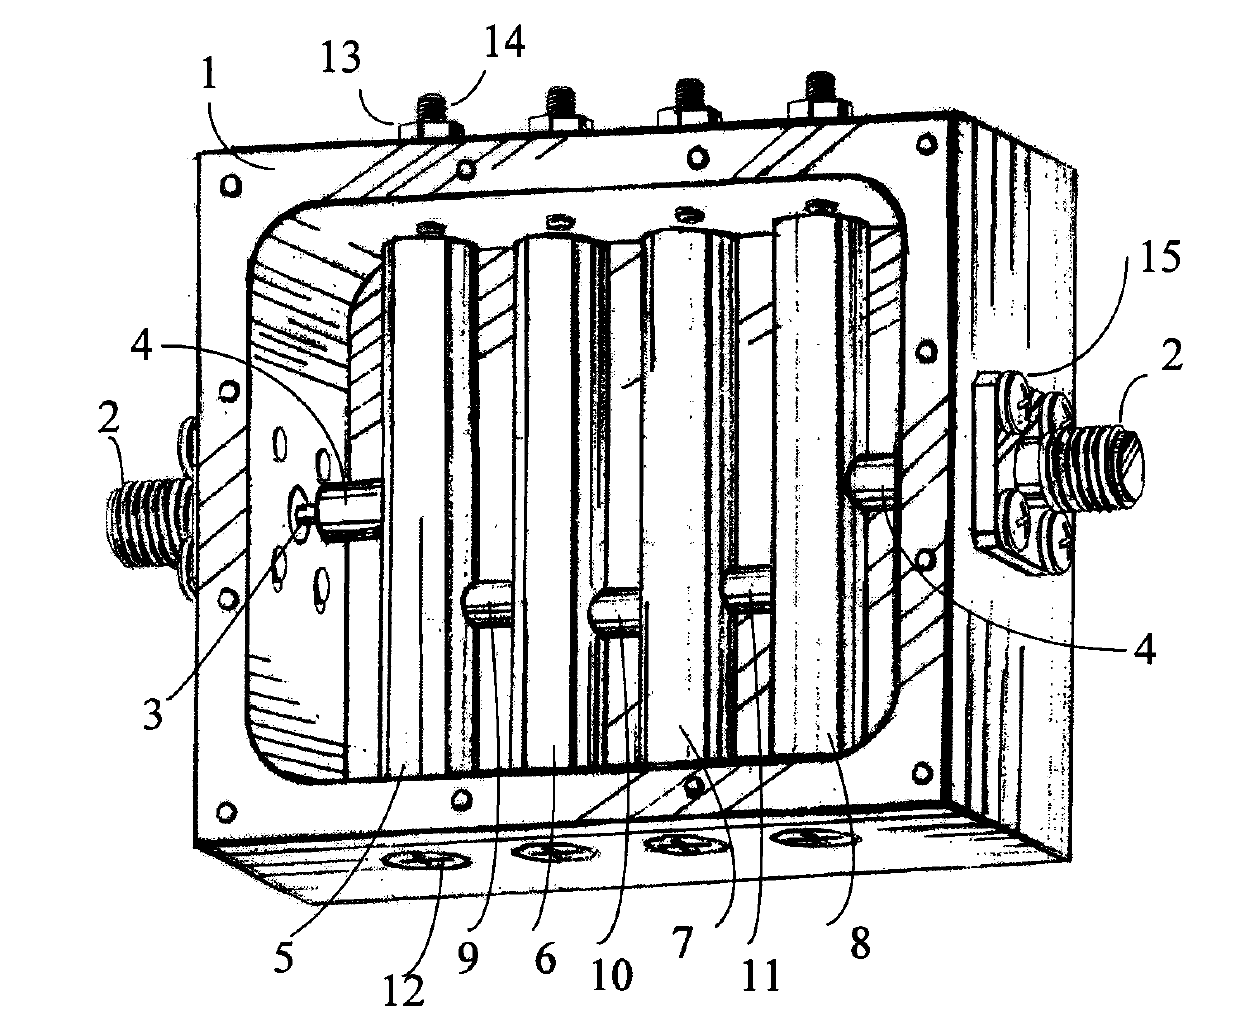 Coaxial wide-band filter